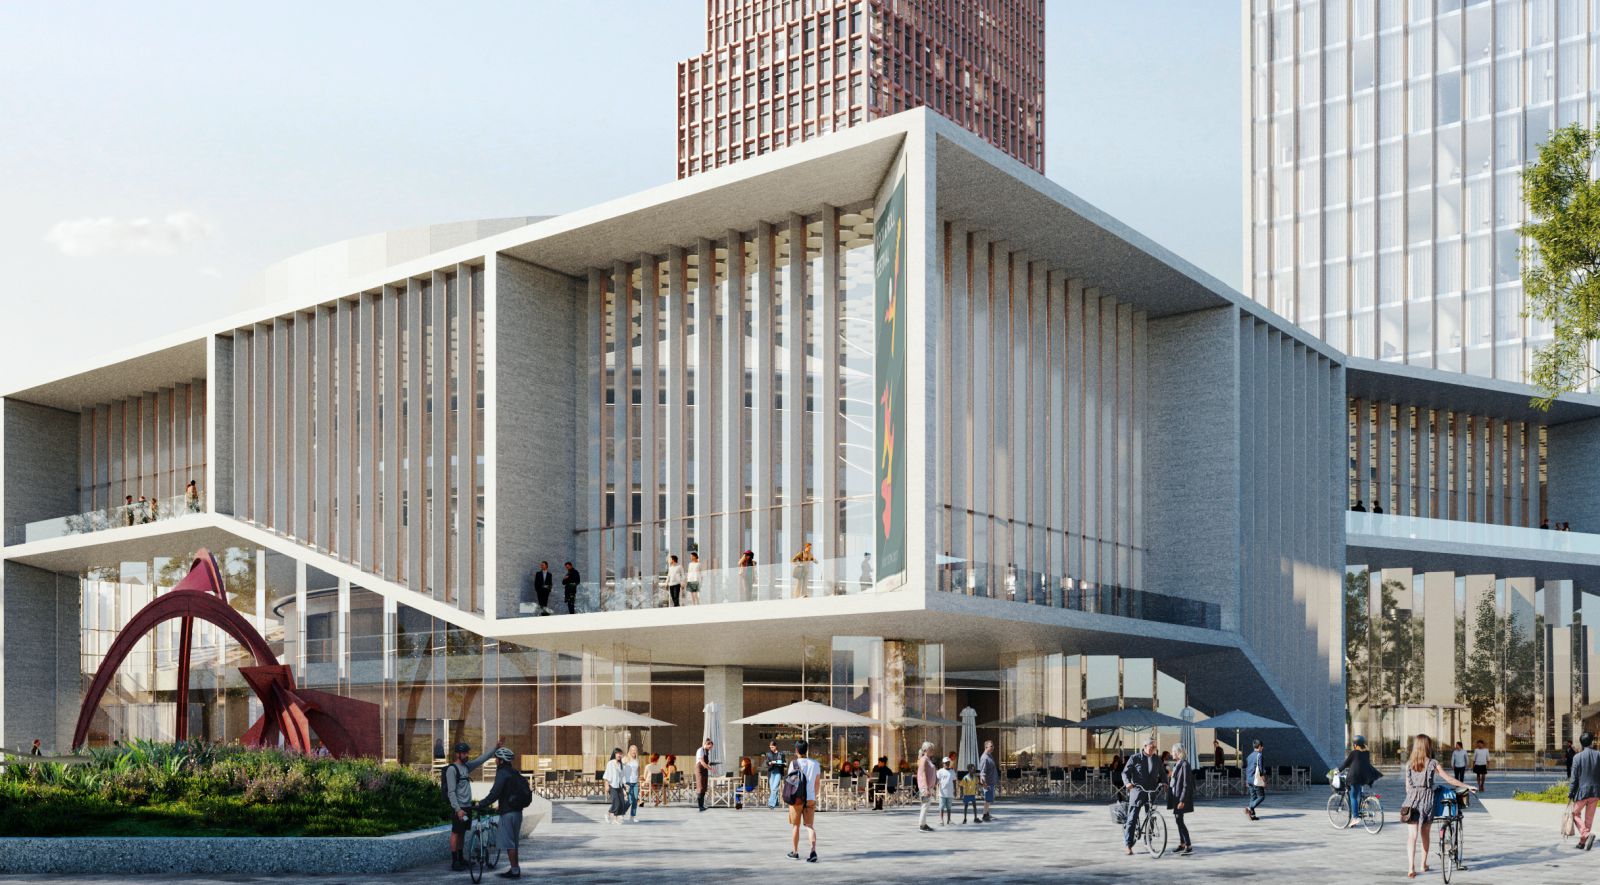 New cultural building and district for Bratislava